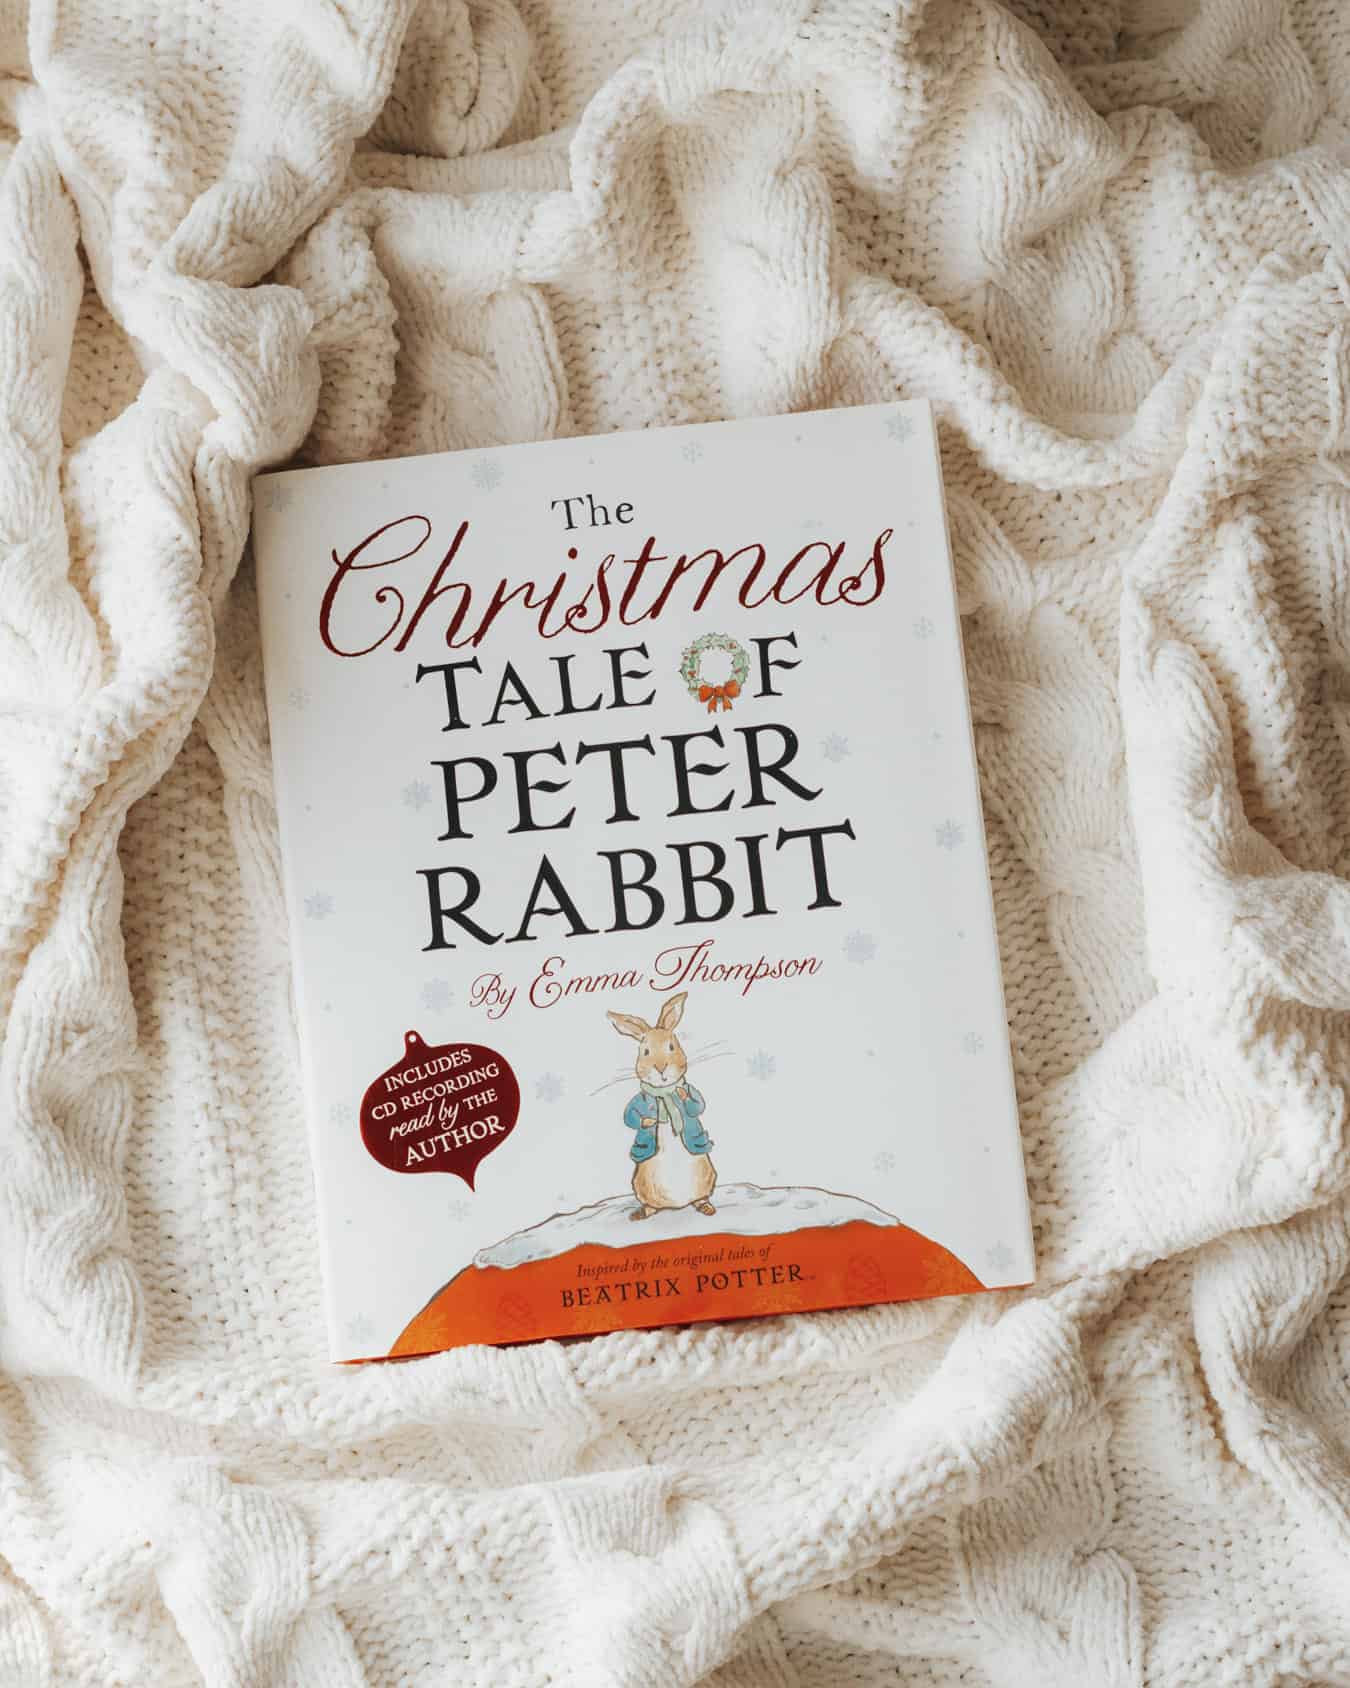 A book, The Christmas Tale of Peter Rabbit, on a cabled blanket.